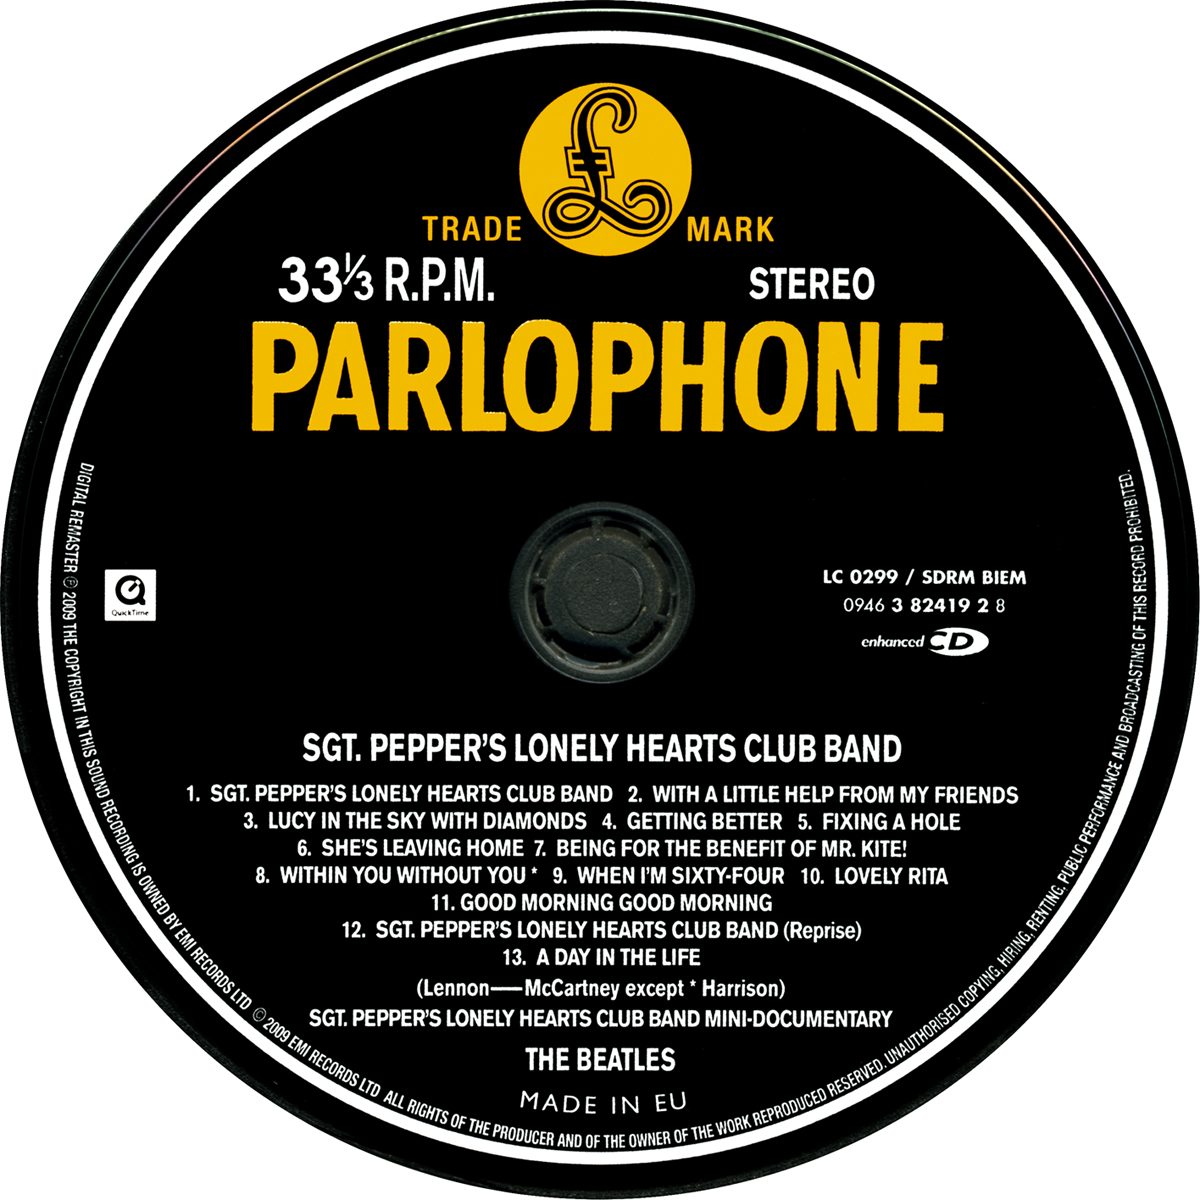 Mp3 pepper. Sgt. Pepper’s Lonely Hearts Club Band the Beatles. The Beatles Sgt. Pepper`s Lonely Hearts Club Band 1967. Sgt Pepper's Lonely Hearts Club Band. Битлз Sgt Pepper s Lonely Hearts Club Band.